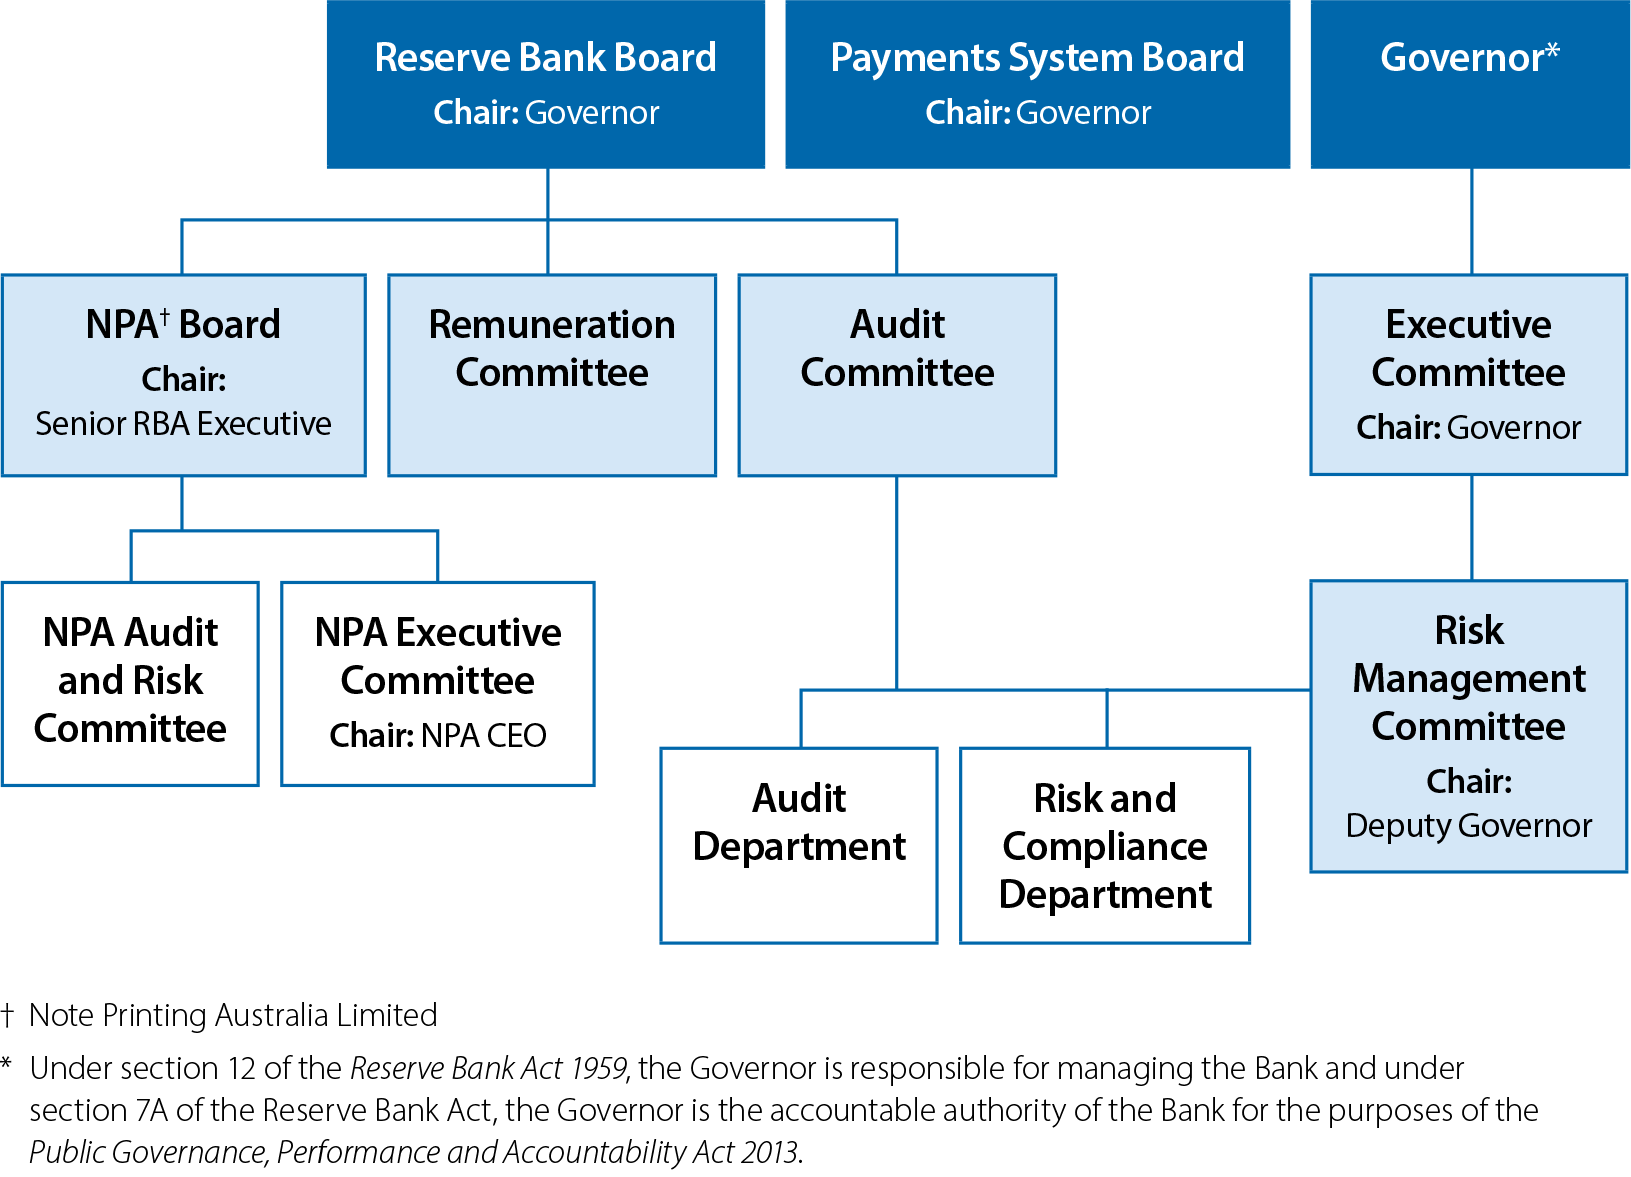 RBA governance structure chart showing the boards and committees overseeing activities. The top level includes Reserve Bank Board, Payment System Board and Governor. The second level under Reserve Bank Board is NPA Board, Remuneration Committee and Audit Committee. Under Governor is Executive Committee. The third level shows various departments and committees.